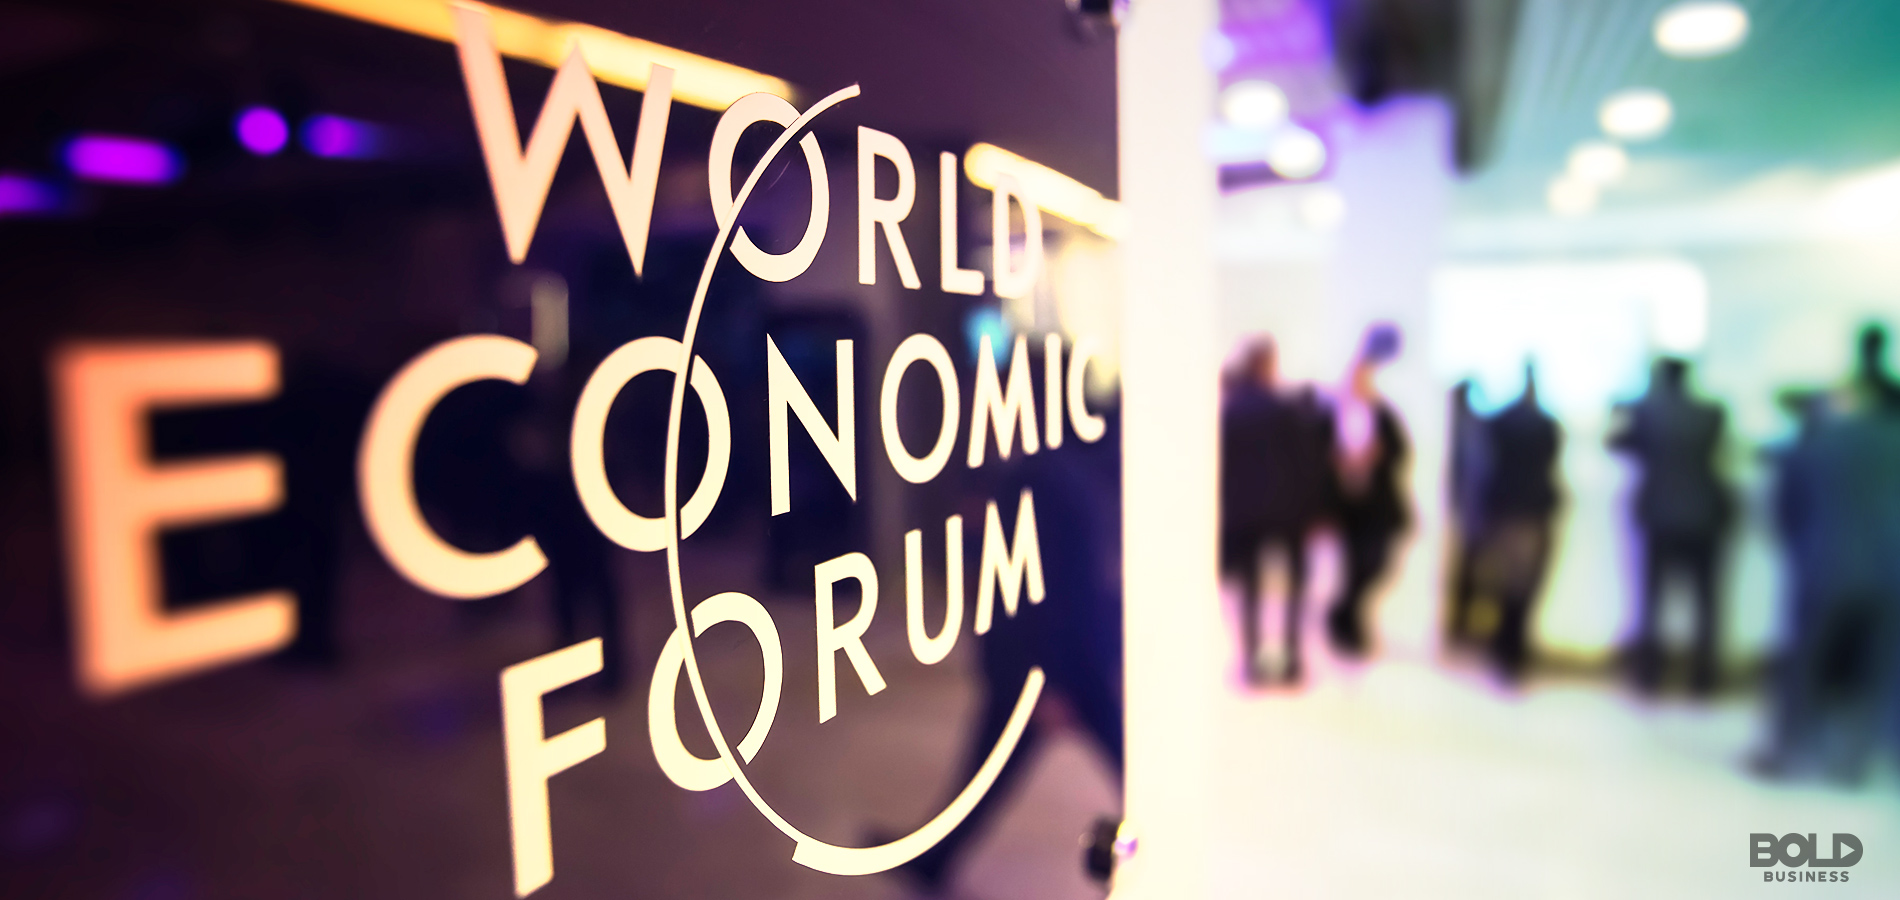 Who attends the World Economic Forum? Global leaders and influencers.